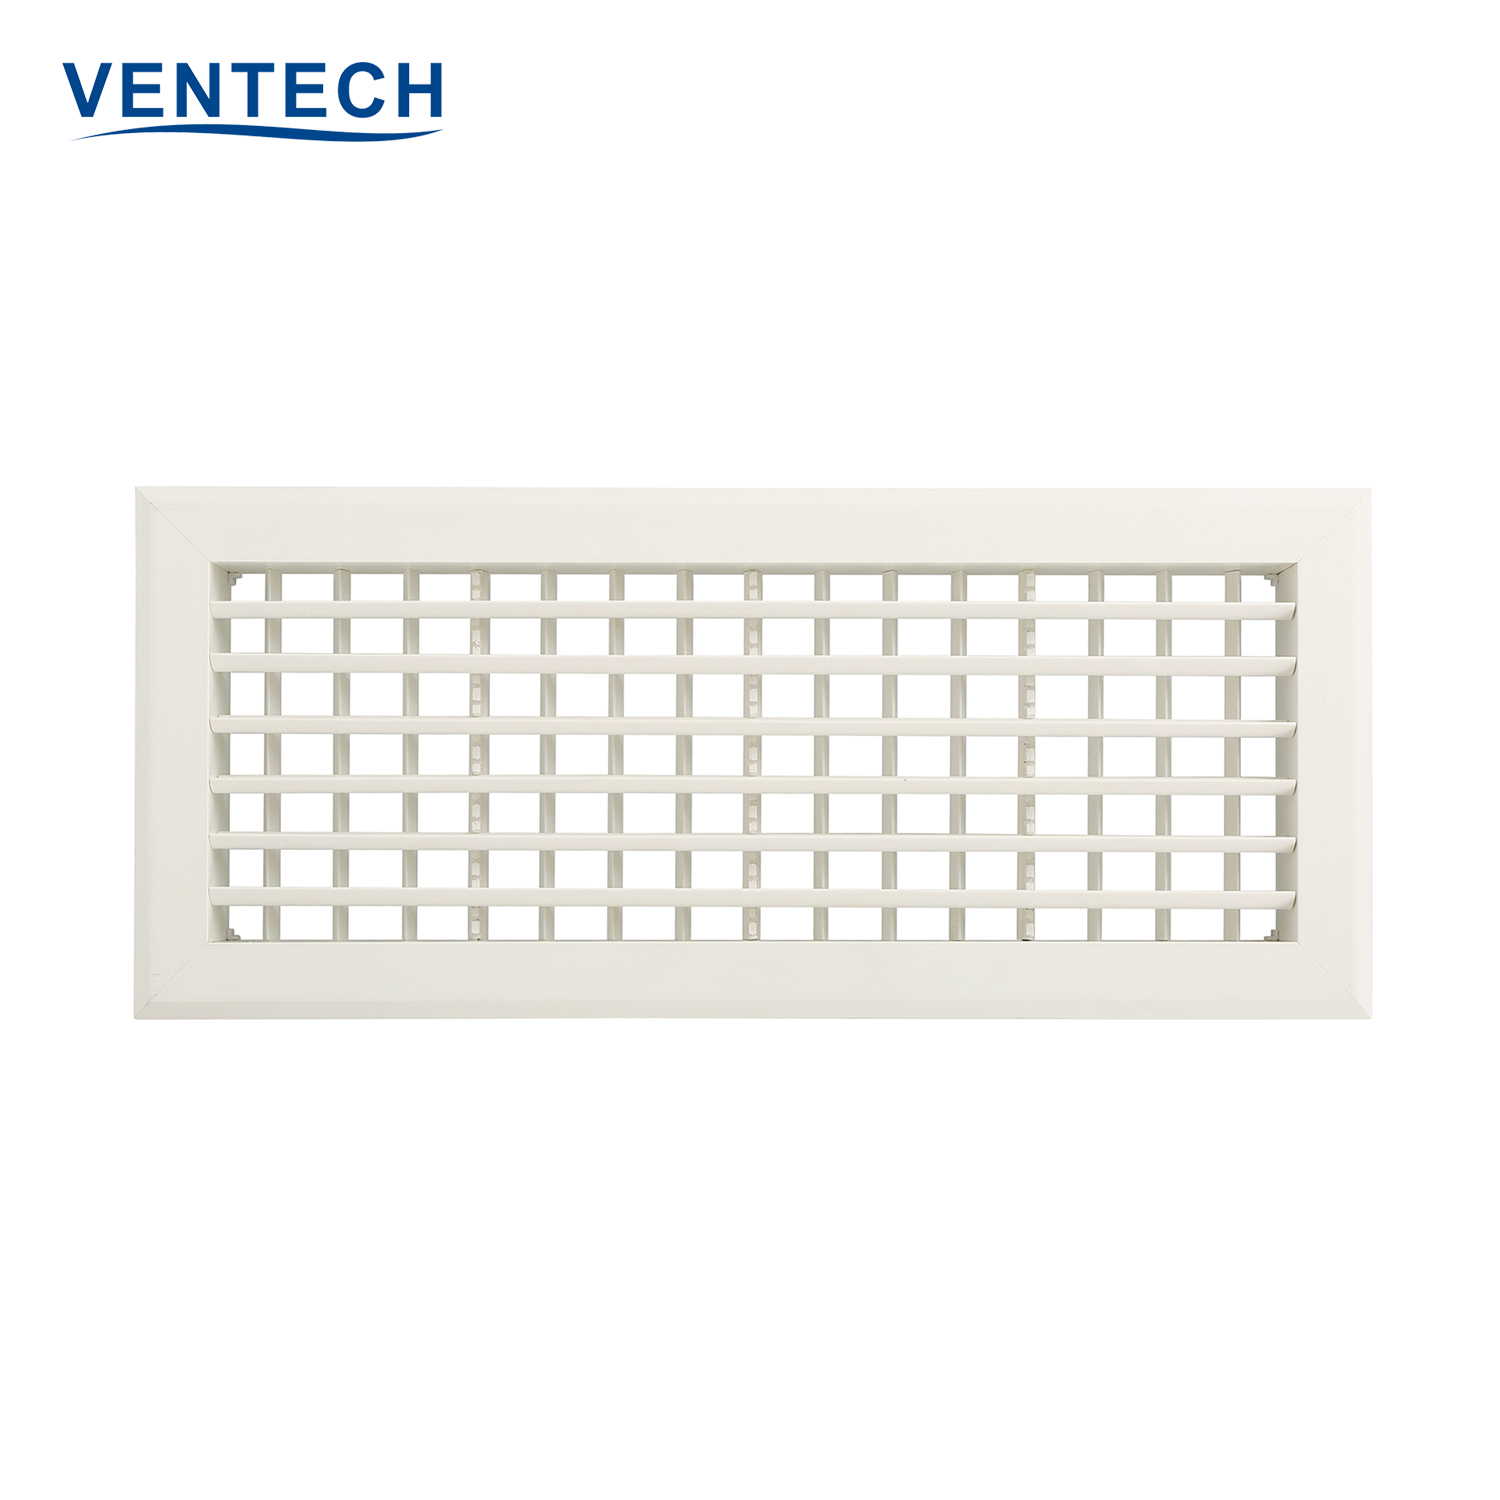 Ventech linear bar grille price supplier for office budilings-1